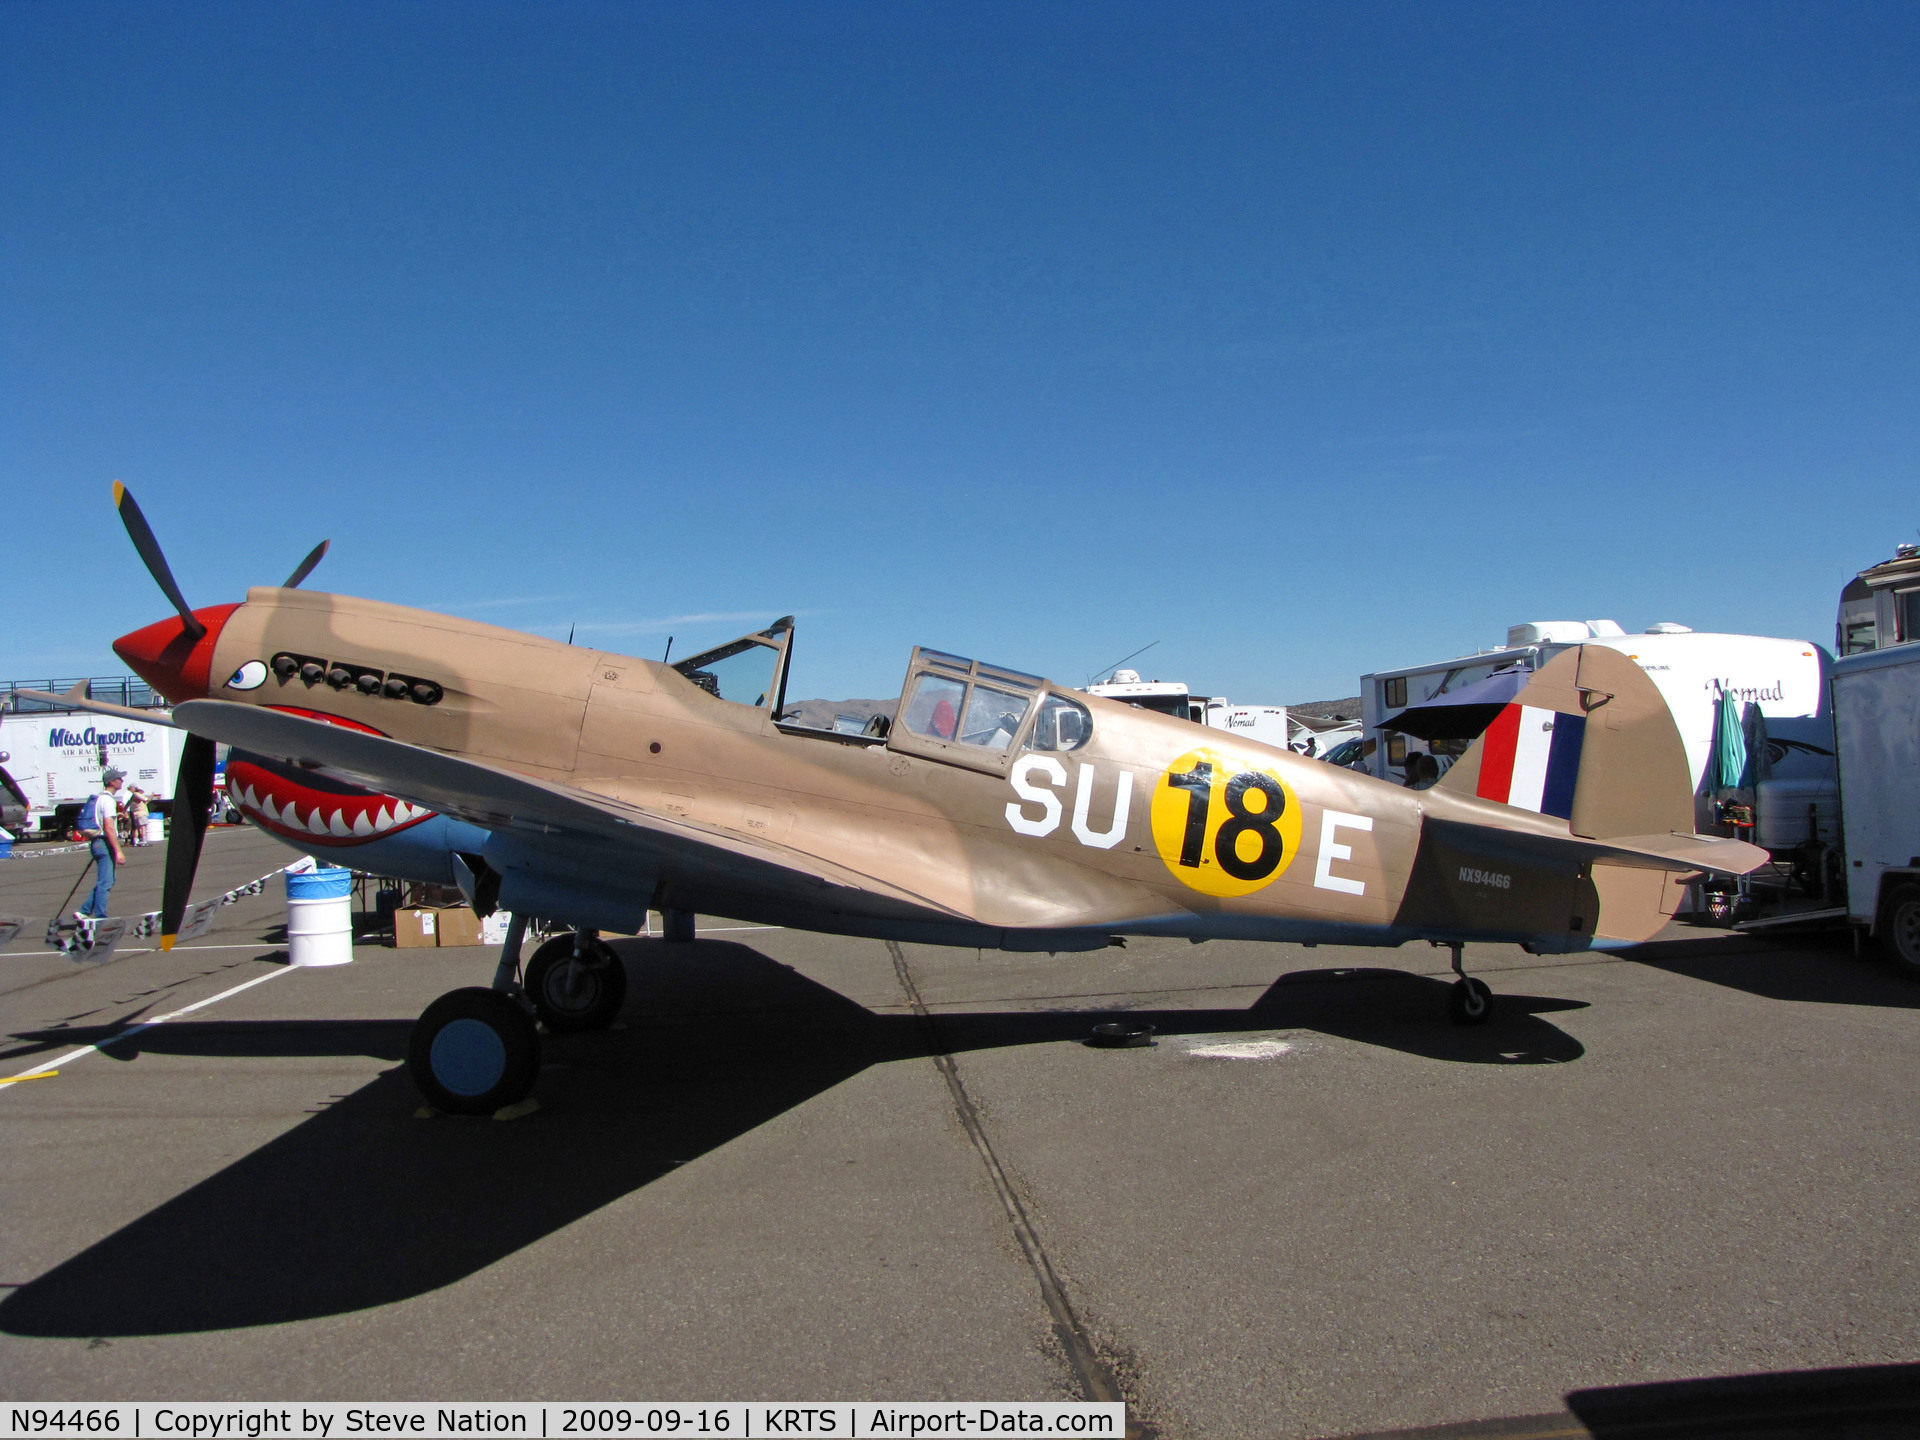 N94466, 1942 Curtiss P-40E C/N AK-899, Race #18 is a sharkmouth P-40E (as NX94466) with desert camo and 